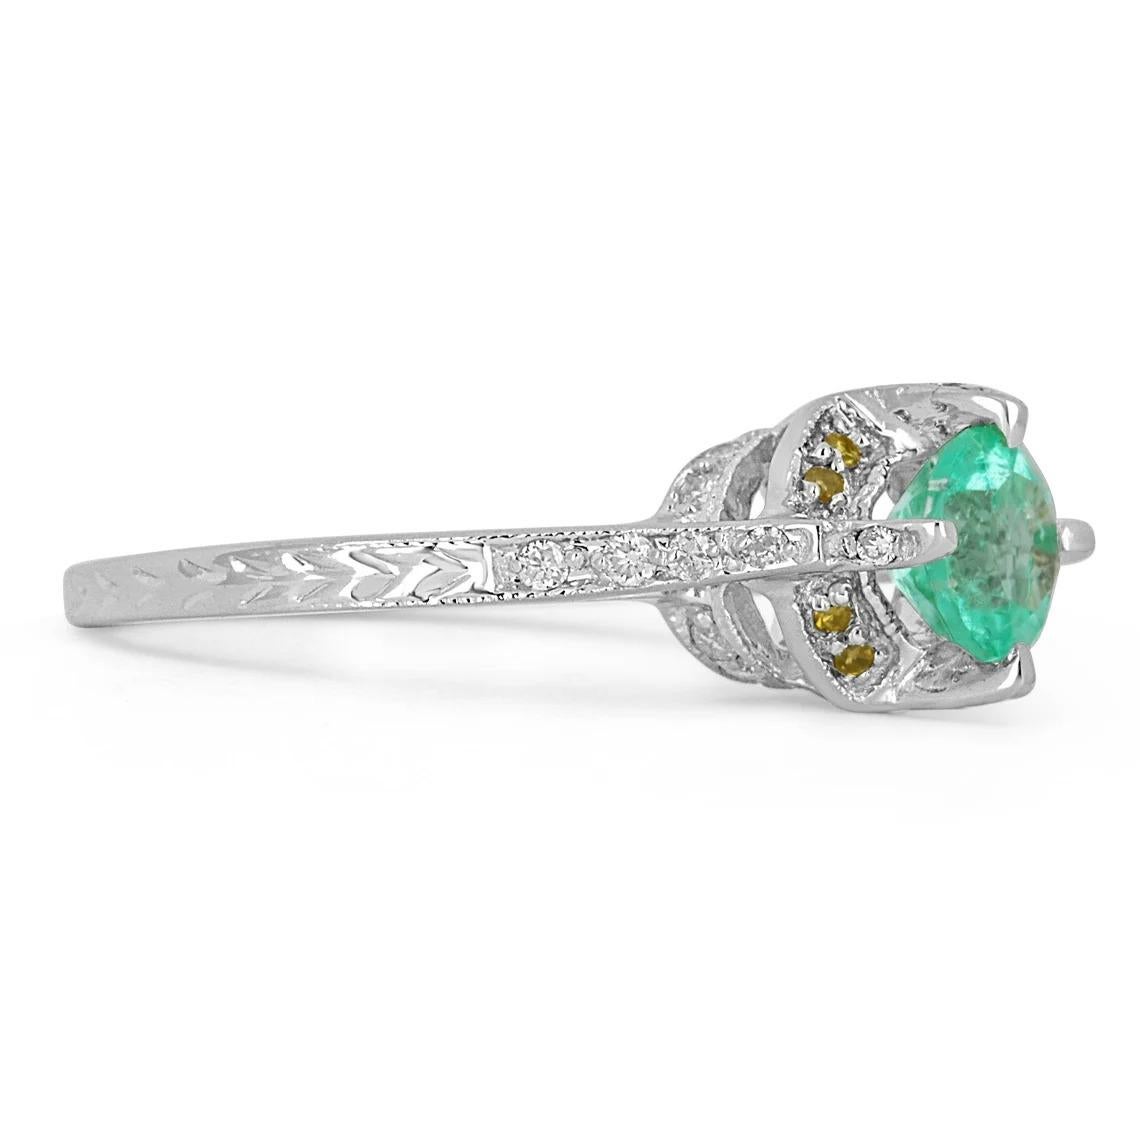 Featured is a stunning Colombian emerald and diamond engagement ring. The center of attention is a beautiful, and petite 0.84-carat round Colombian emerald showcasing a vivid, medium-light, green color with excellent luster. 26 brilliant round white